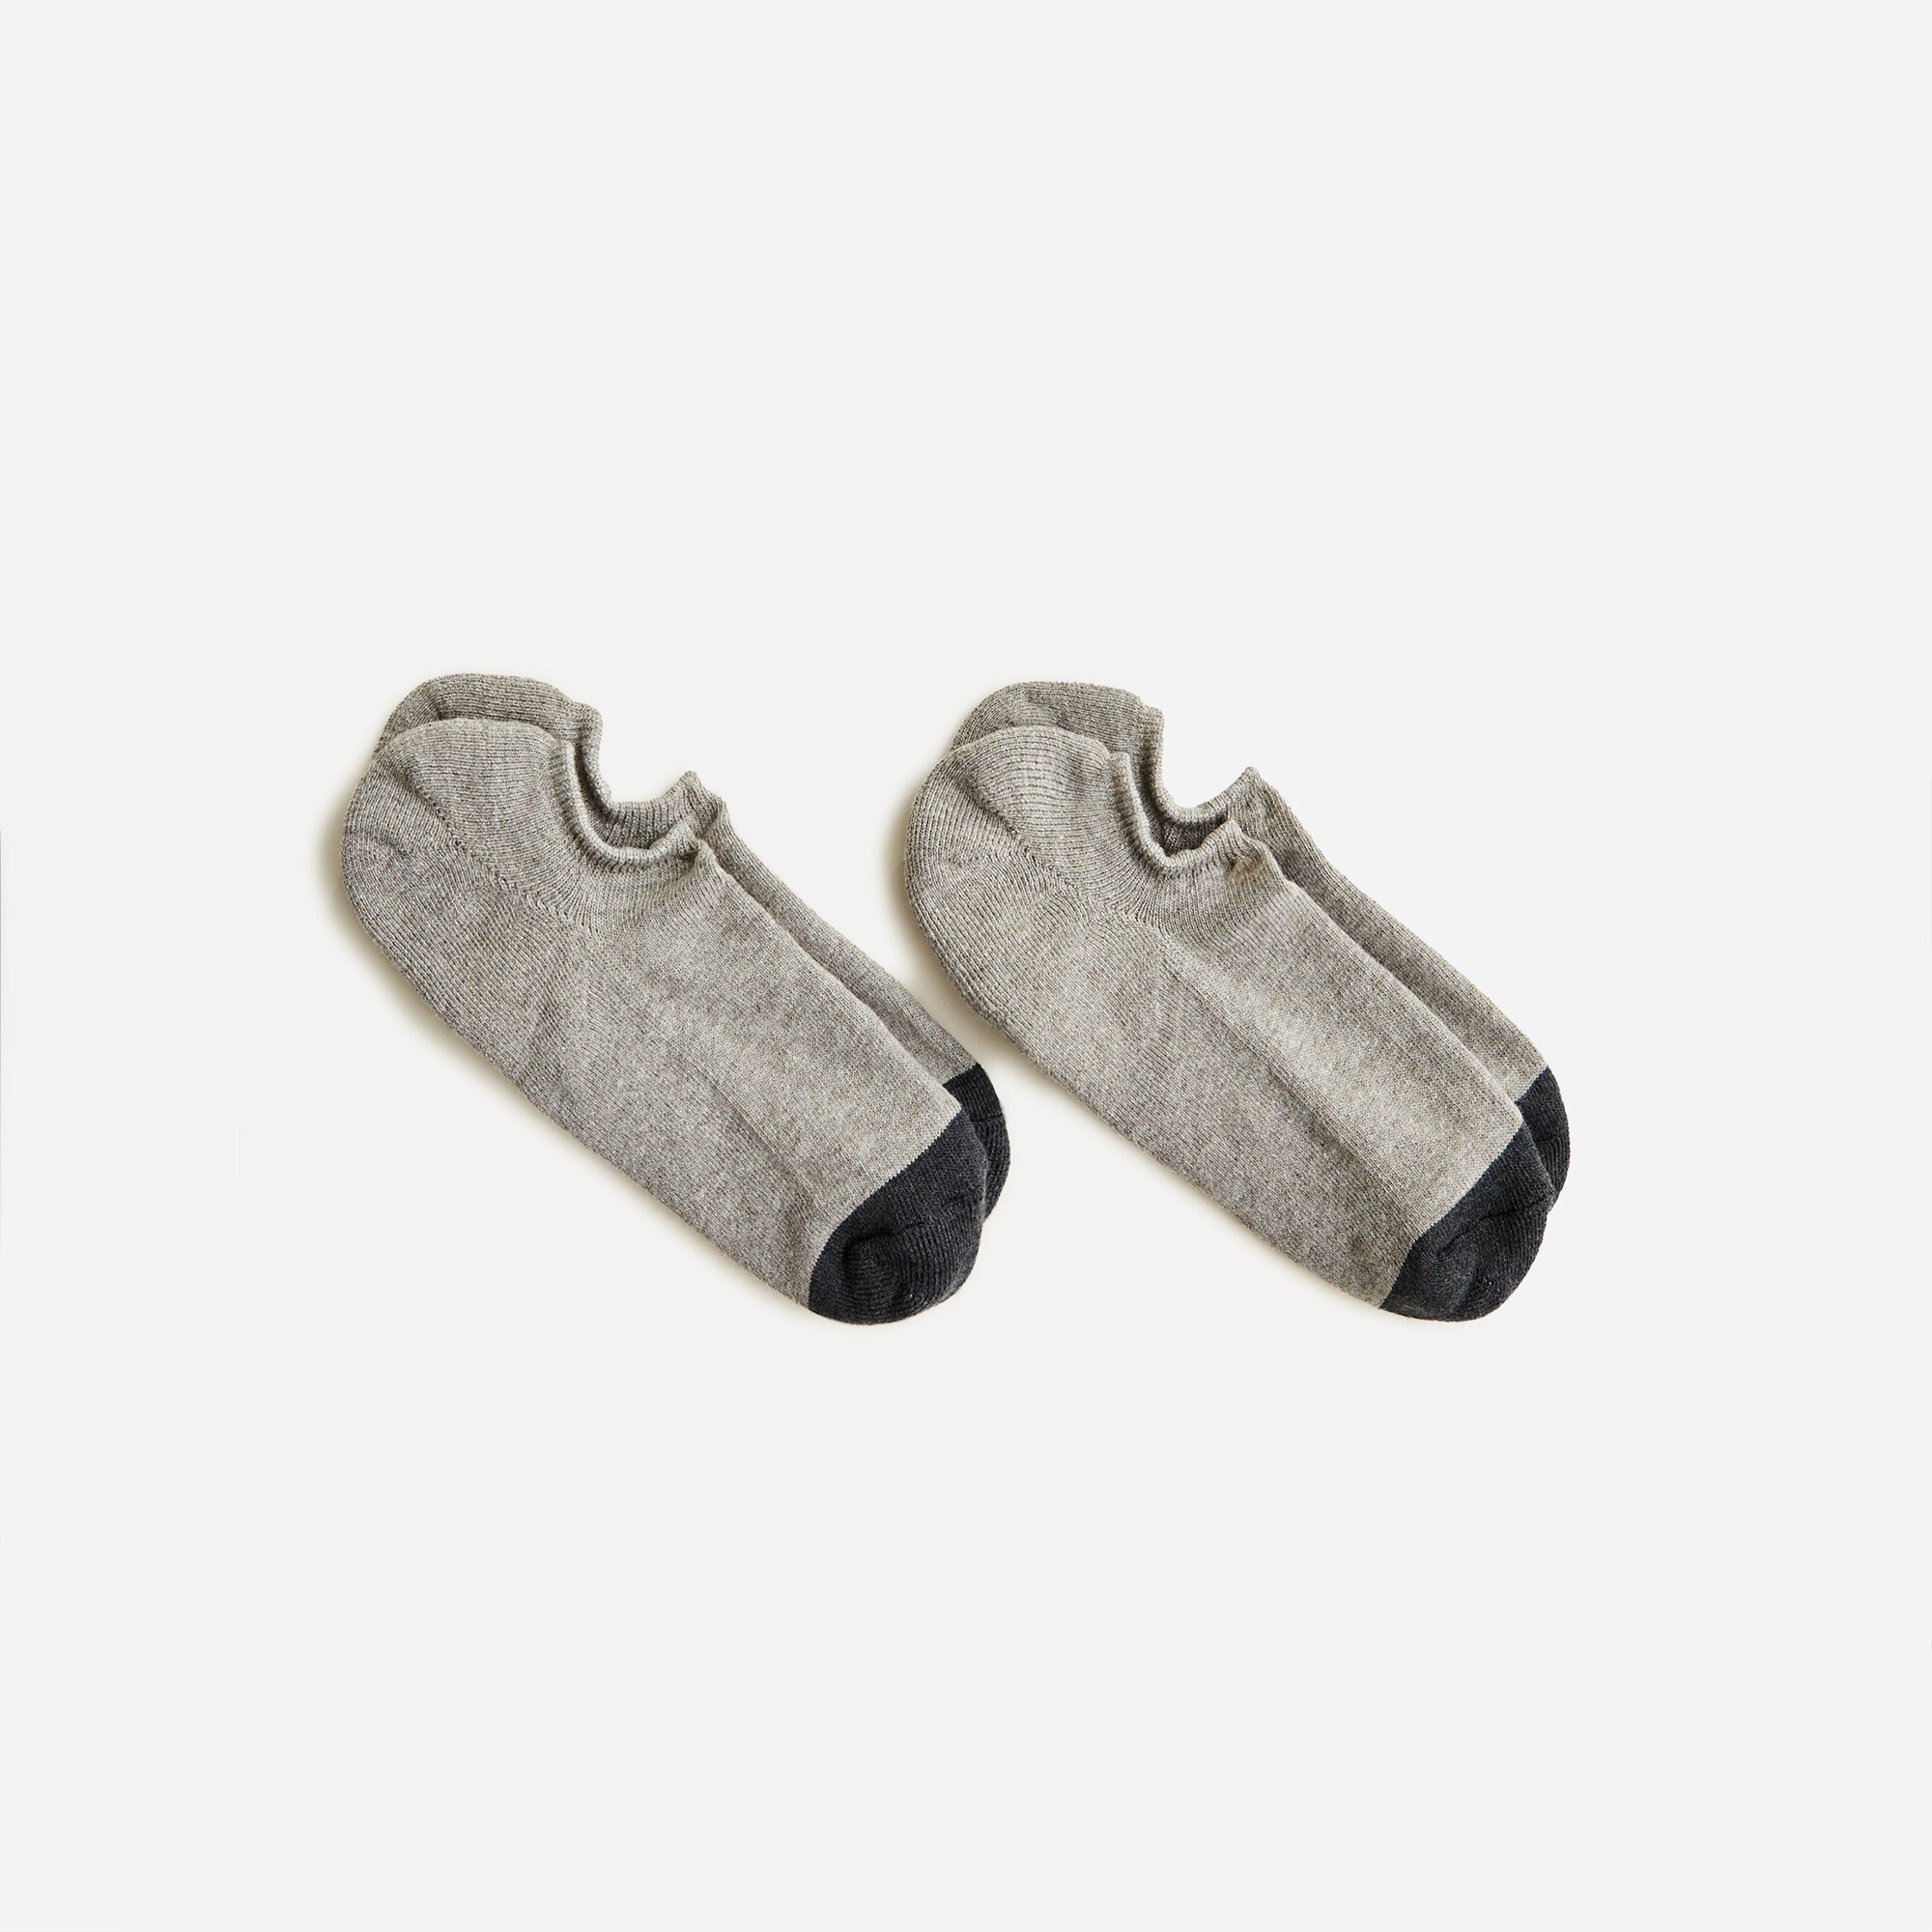  No-show socks two-pack